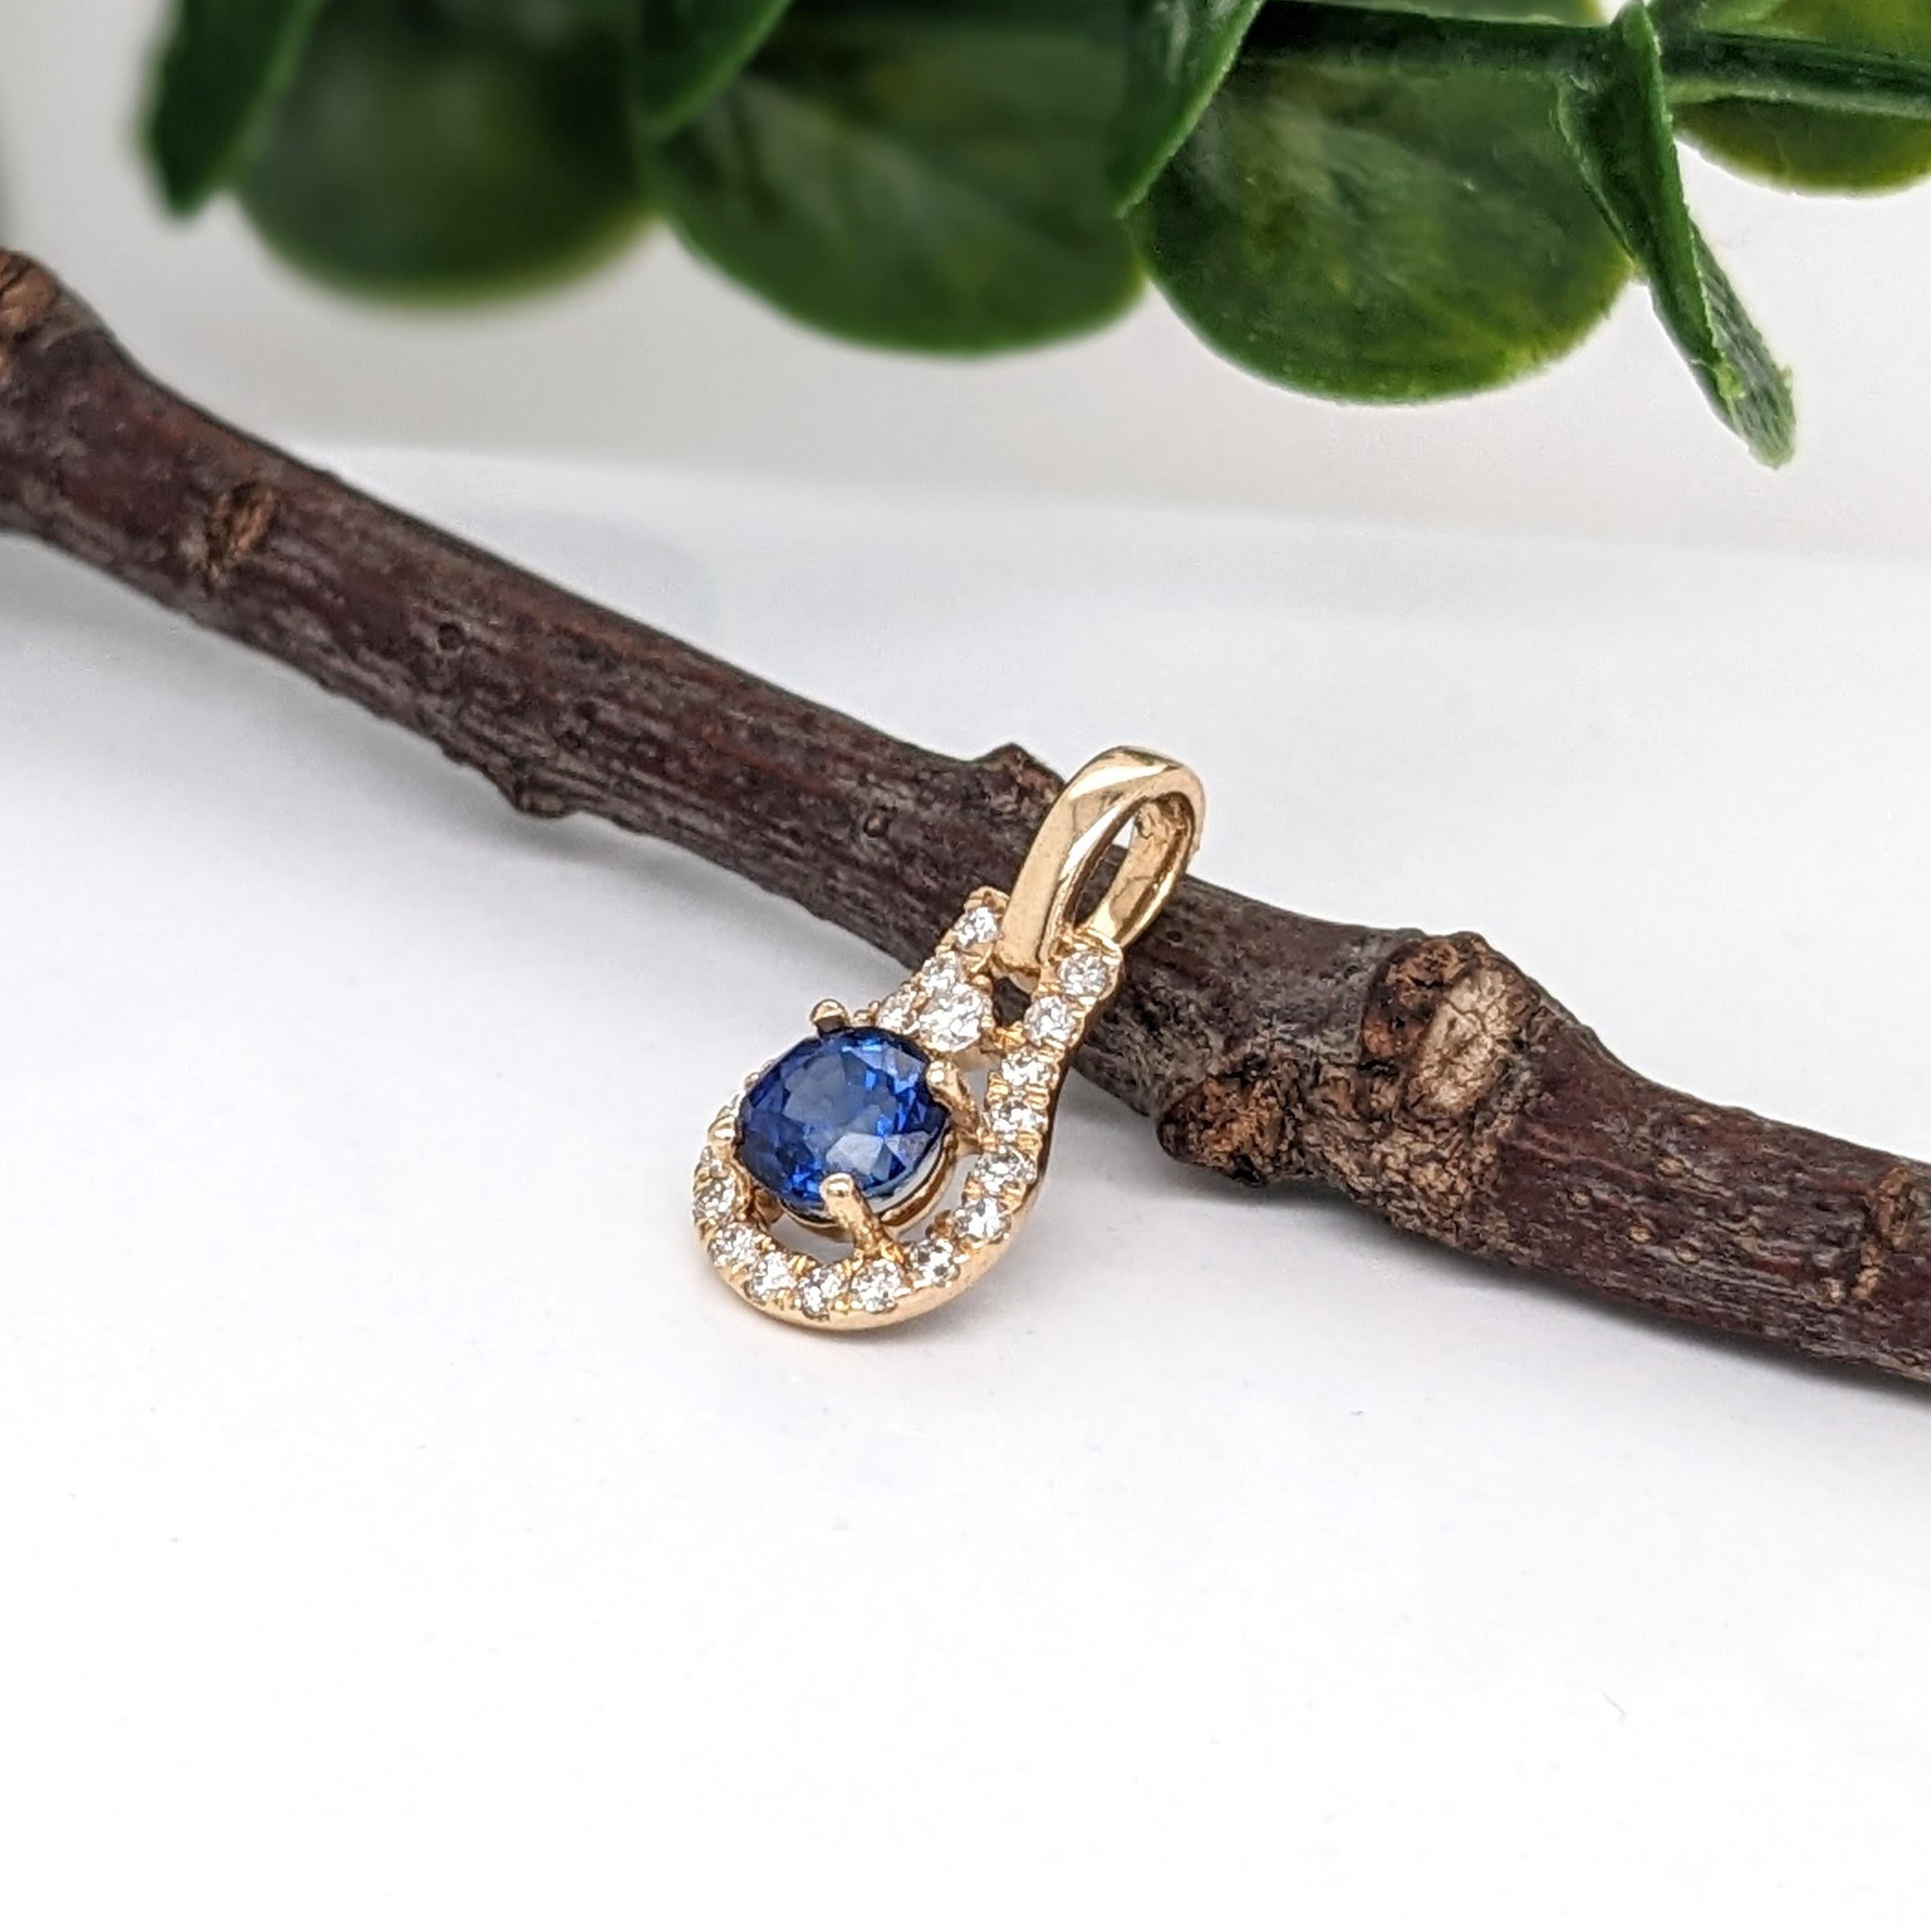 Set in our most popular pendant design featuring a round blue sapphire with natural diamond accents made in 14k solid gold. This pendant can be a beautiful September birthstone present for your loved ones! 

Specifications:

Item Type: Pendant
Type: